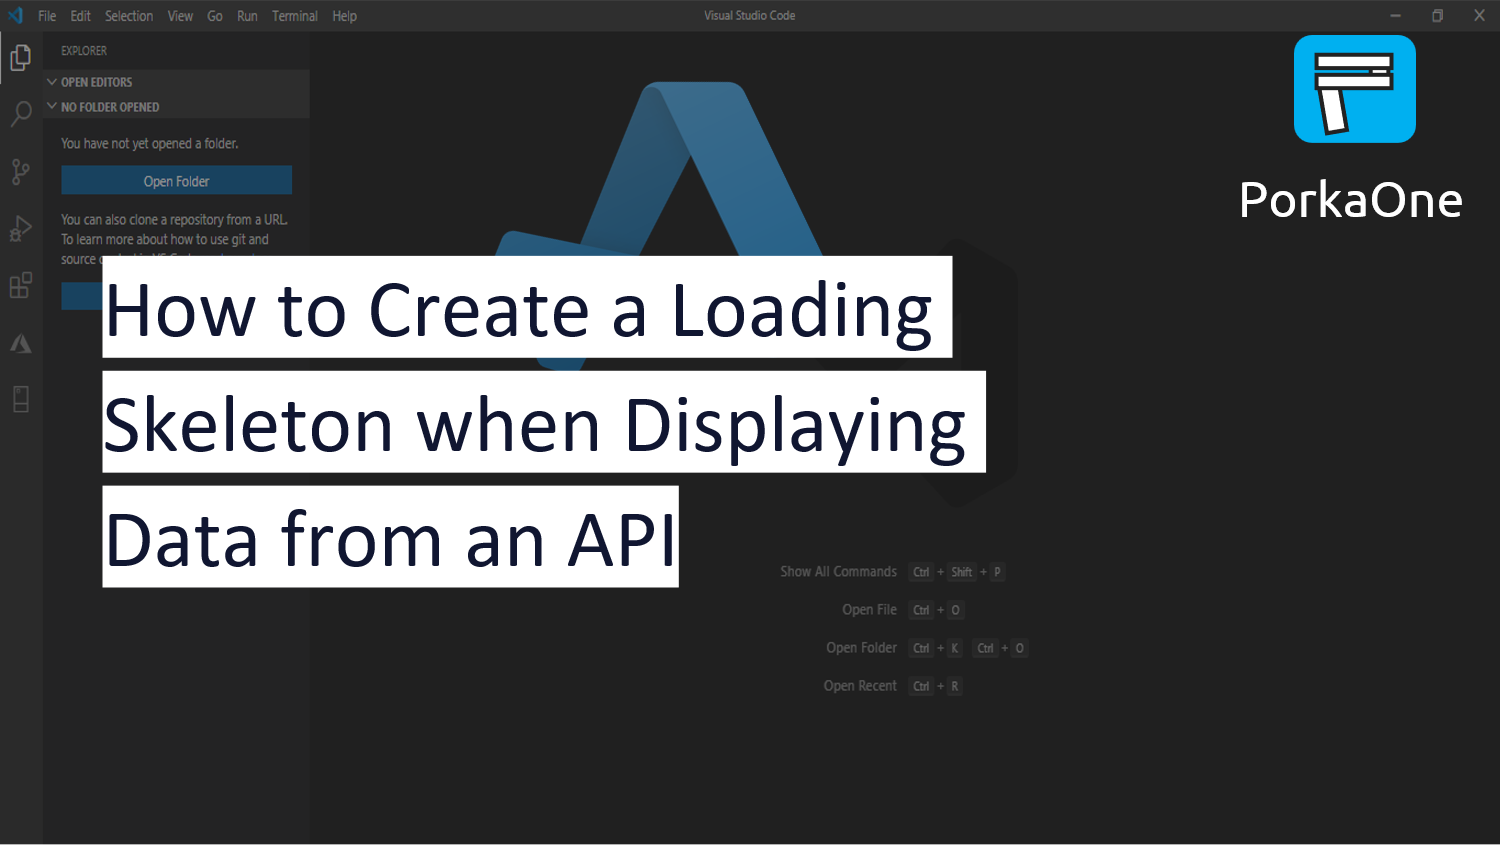 How to Create a Loading Skeleton when Displaying Data from an API